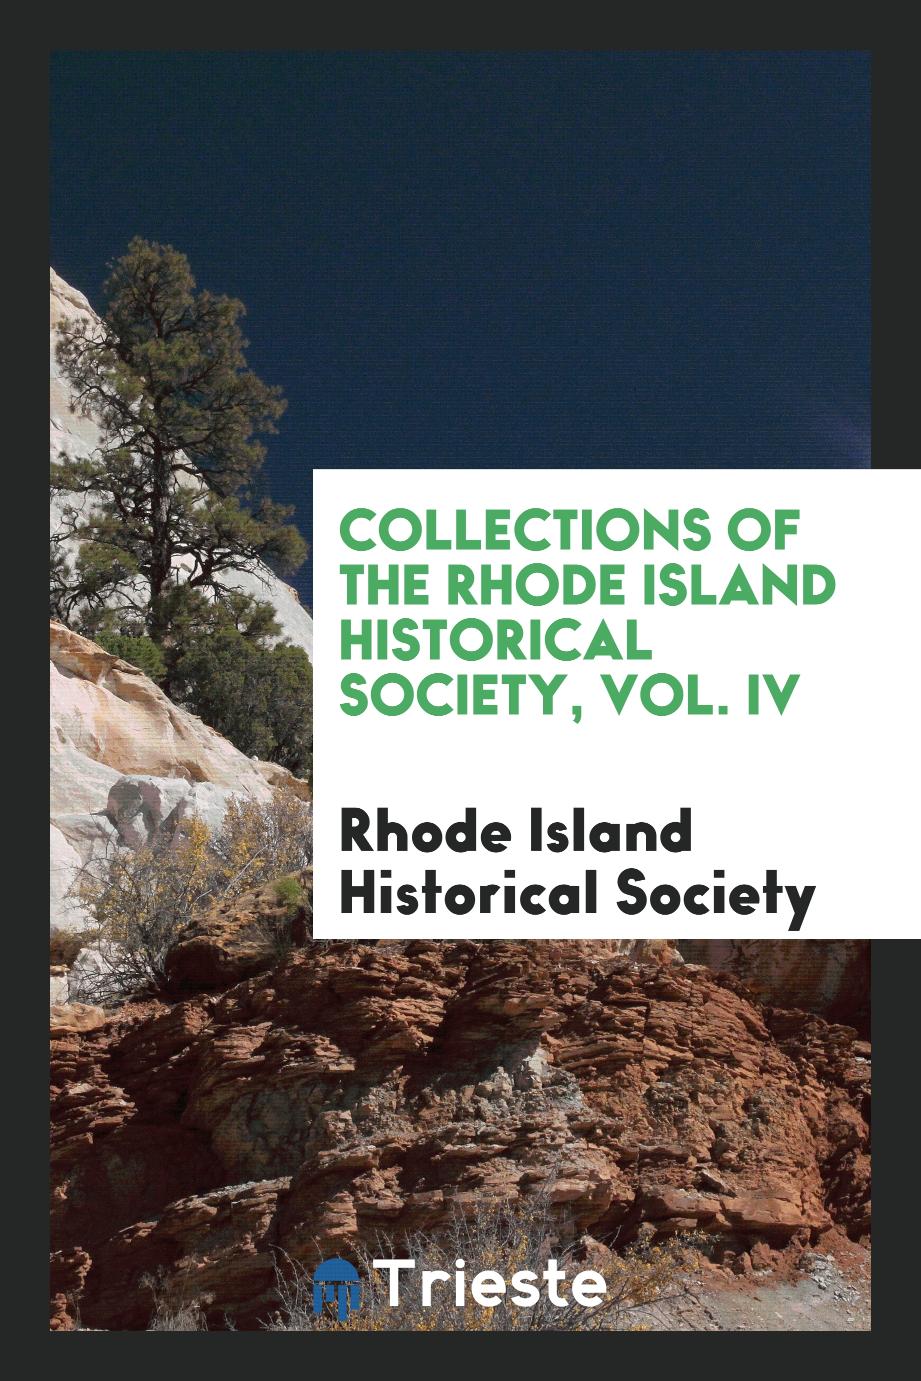 Collections of the Rhode Island Historical Society, Vol. IV